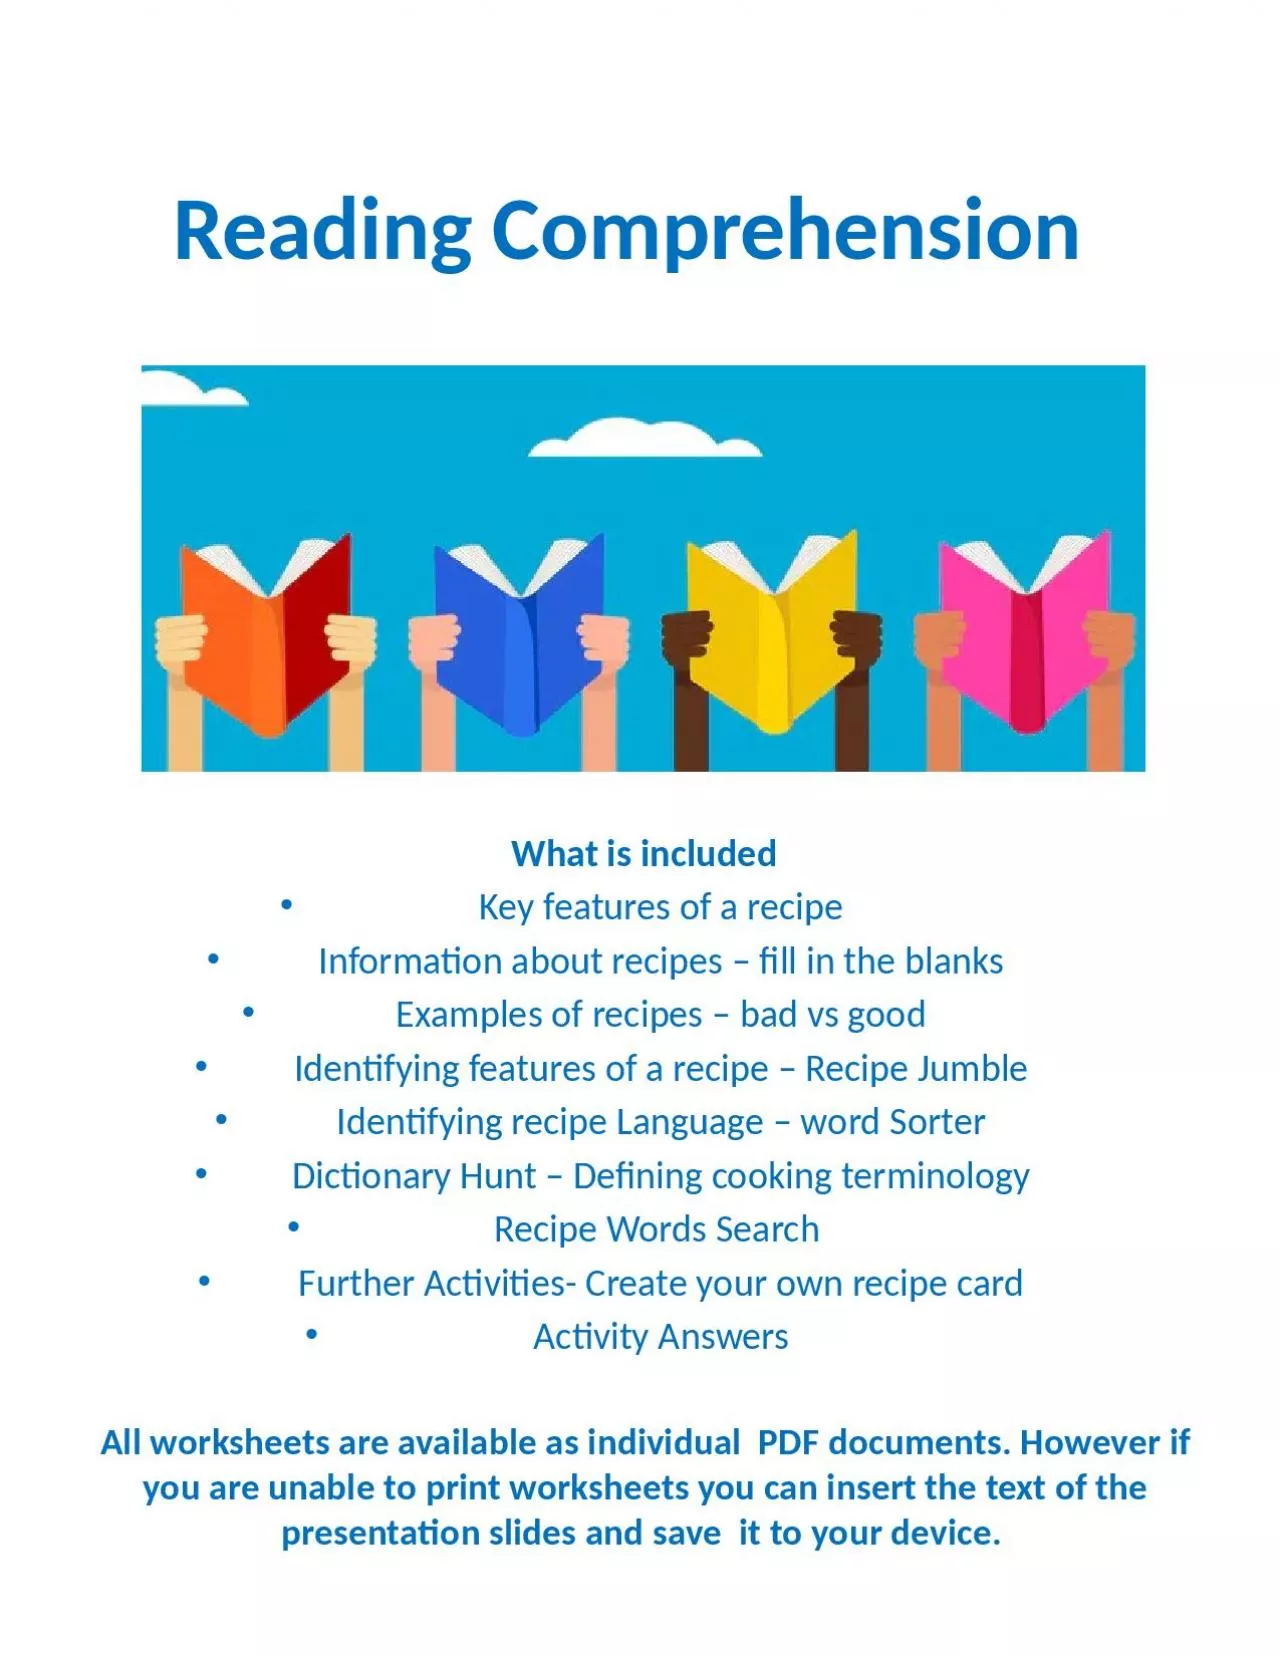 Reading Comprehension What is included